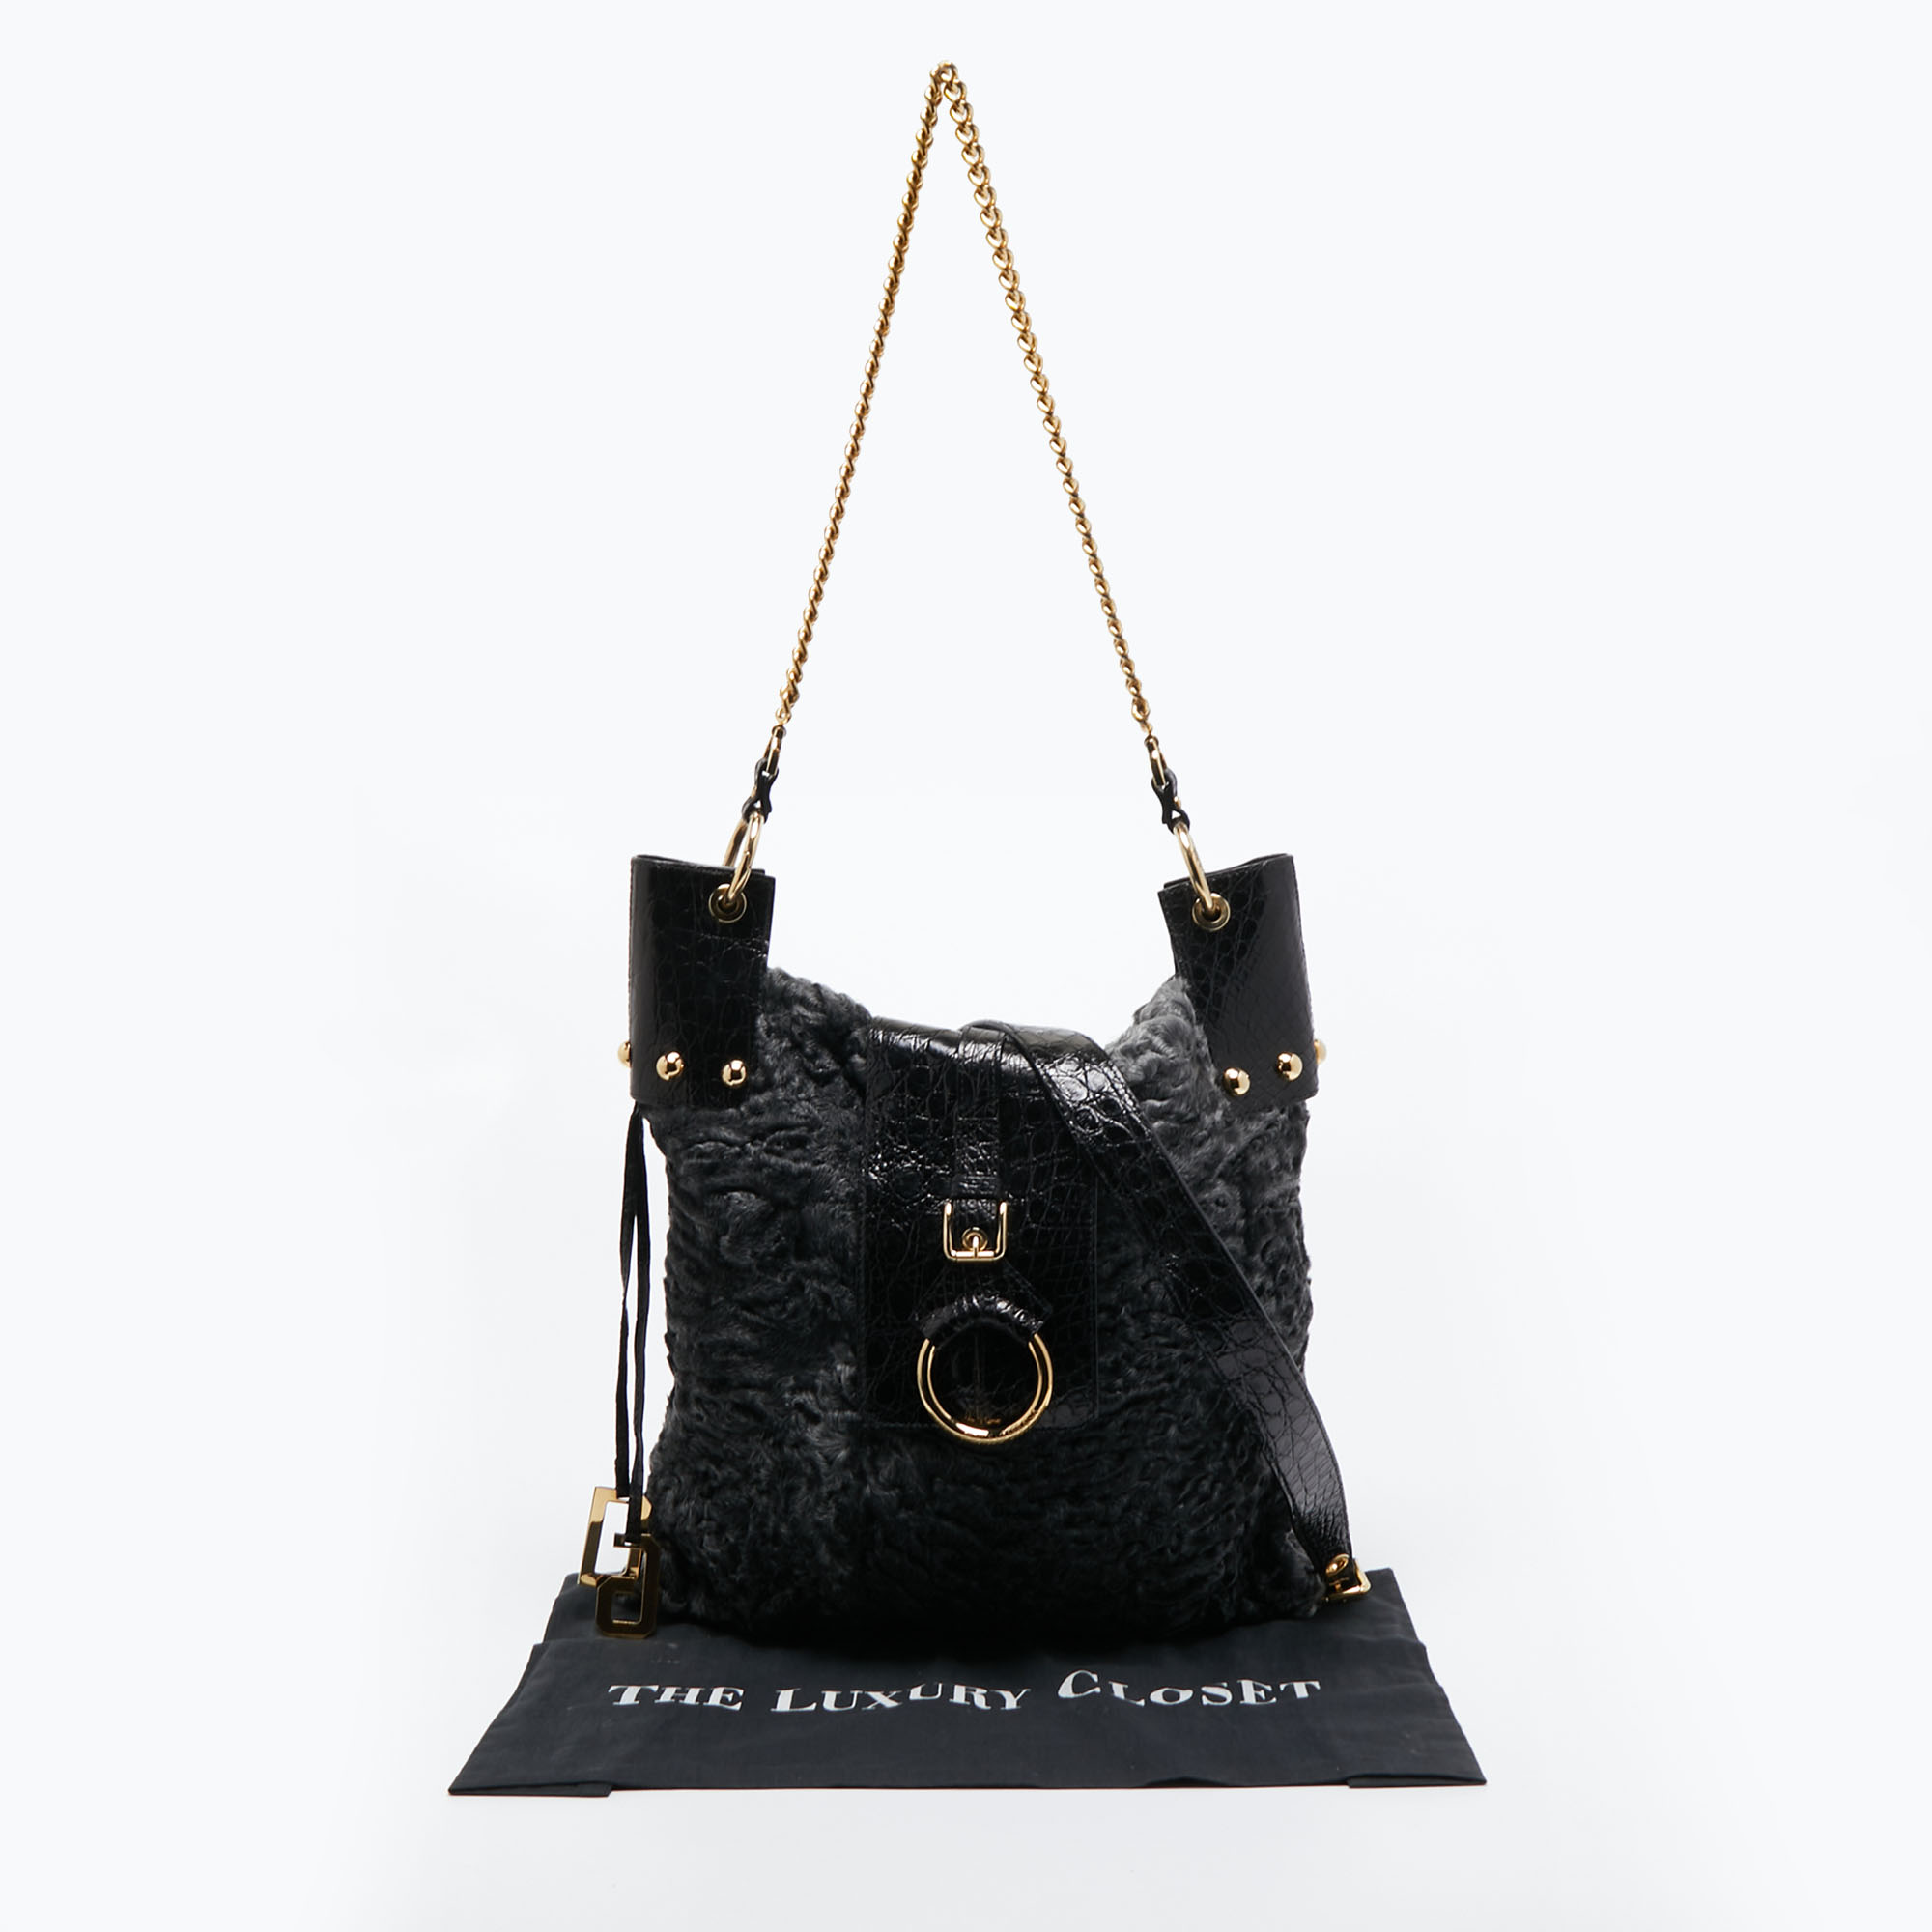 Dolce & Gabbana  Black/Grey Embossed Leather And Fur Tote